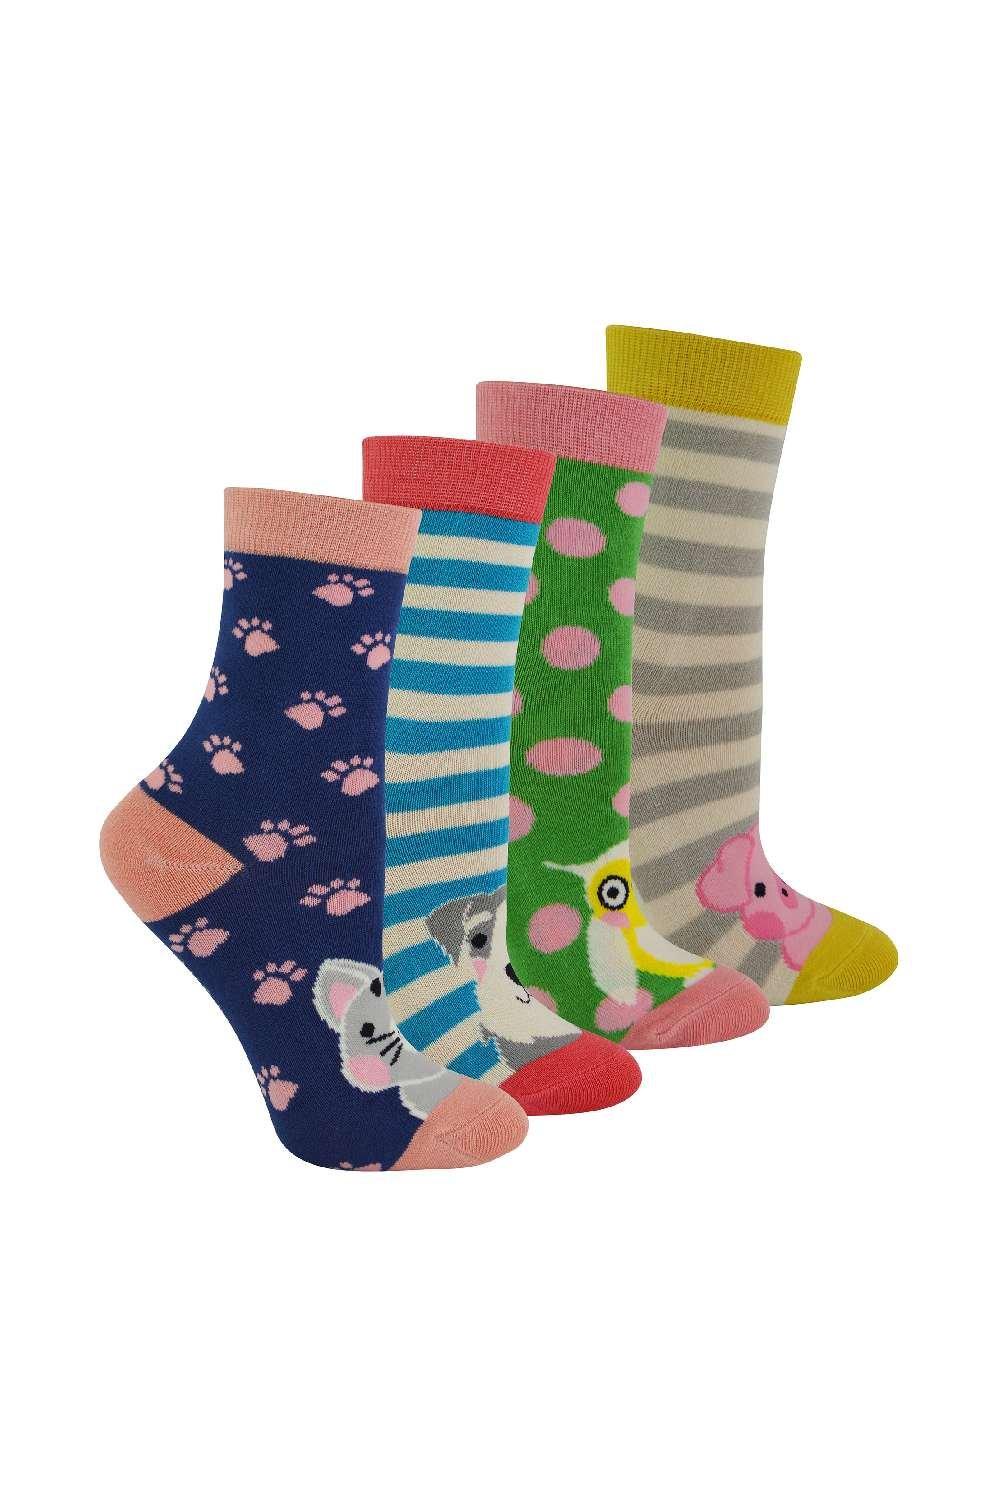 4 Pairs Novelty Animal Pattern Bamboo Socks in a Gift Box